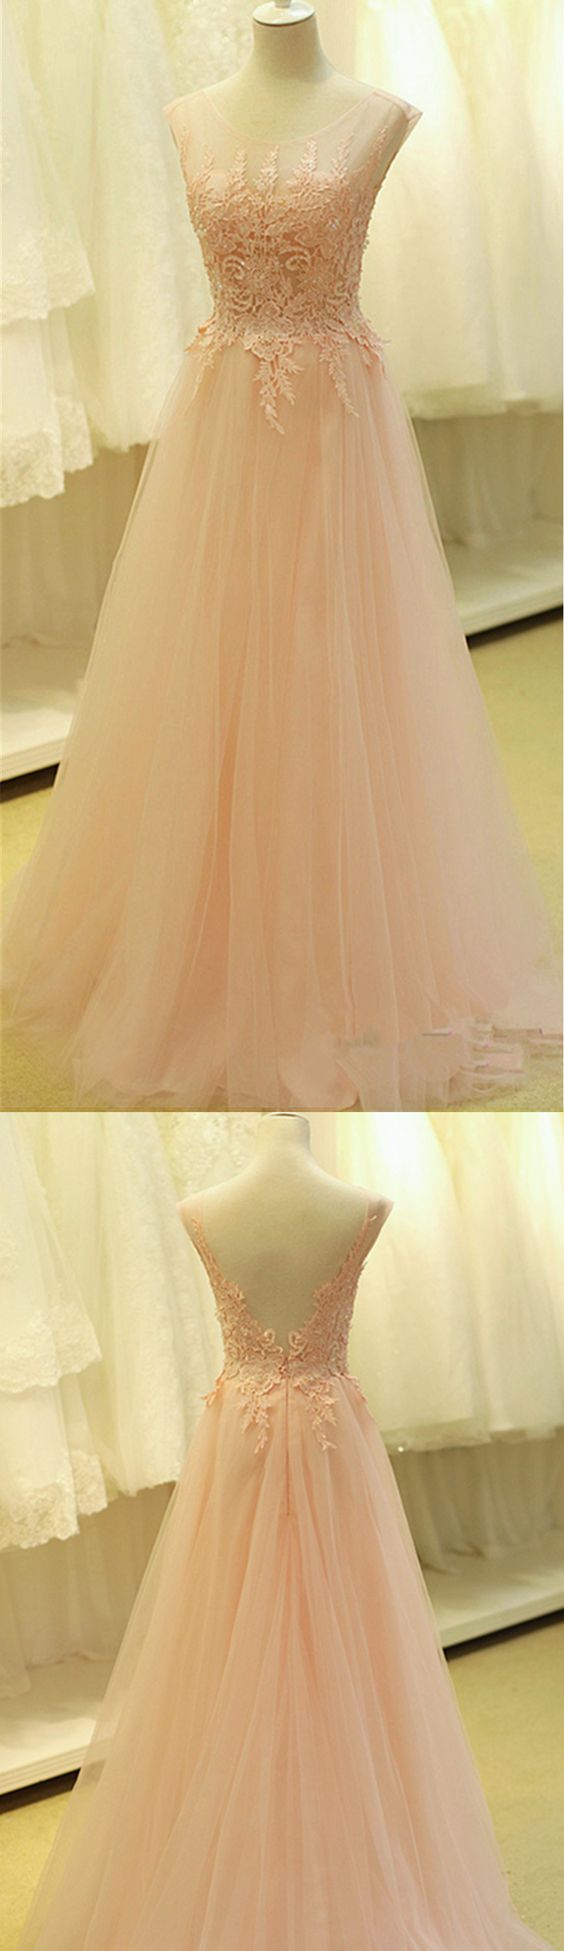 2016 Custom Charming Blush Pink Tulle Chiffon Prom Dress,see Through Sleeveless Evening Dress,lace Applique Sexy Backless Prom Dress